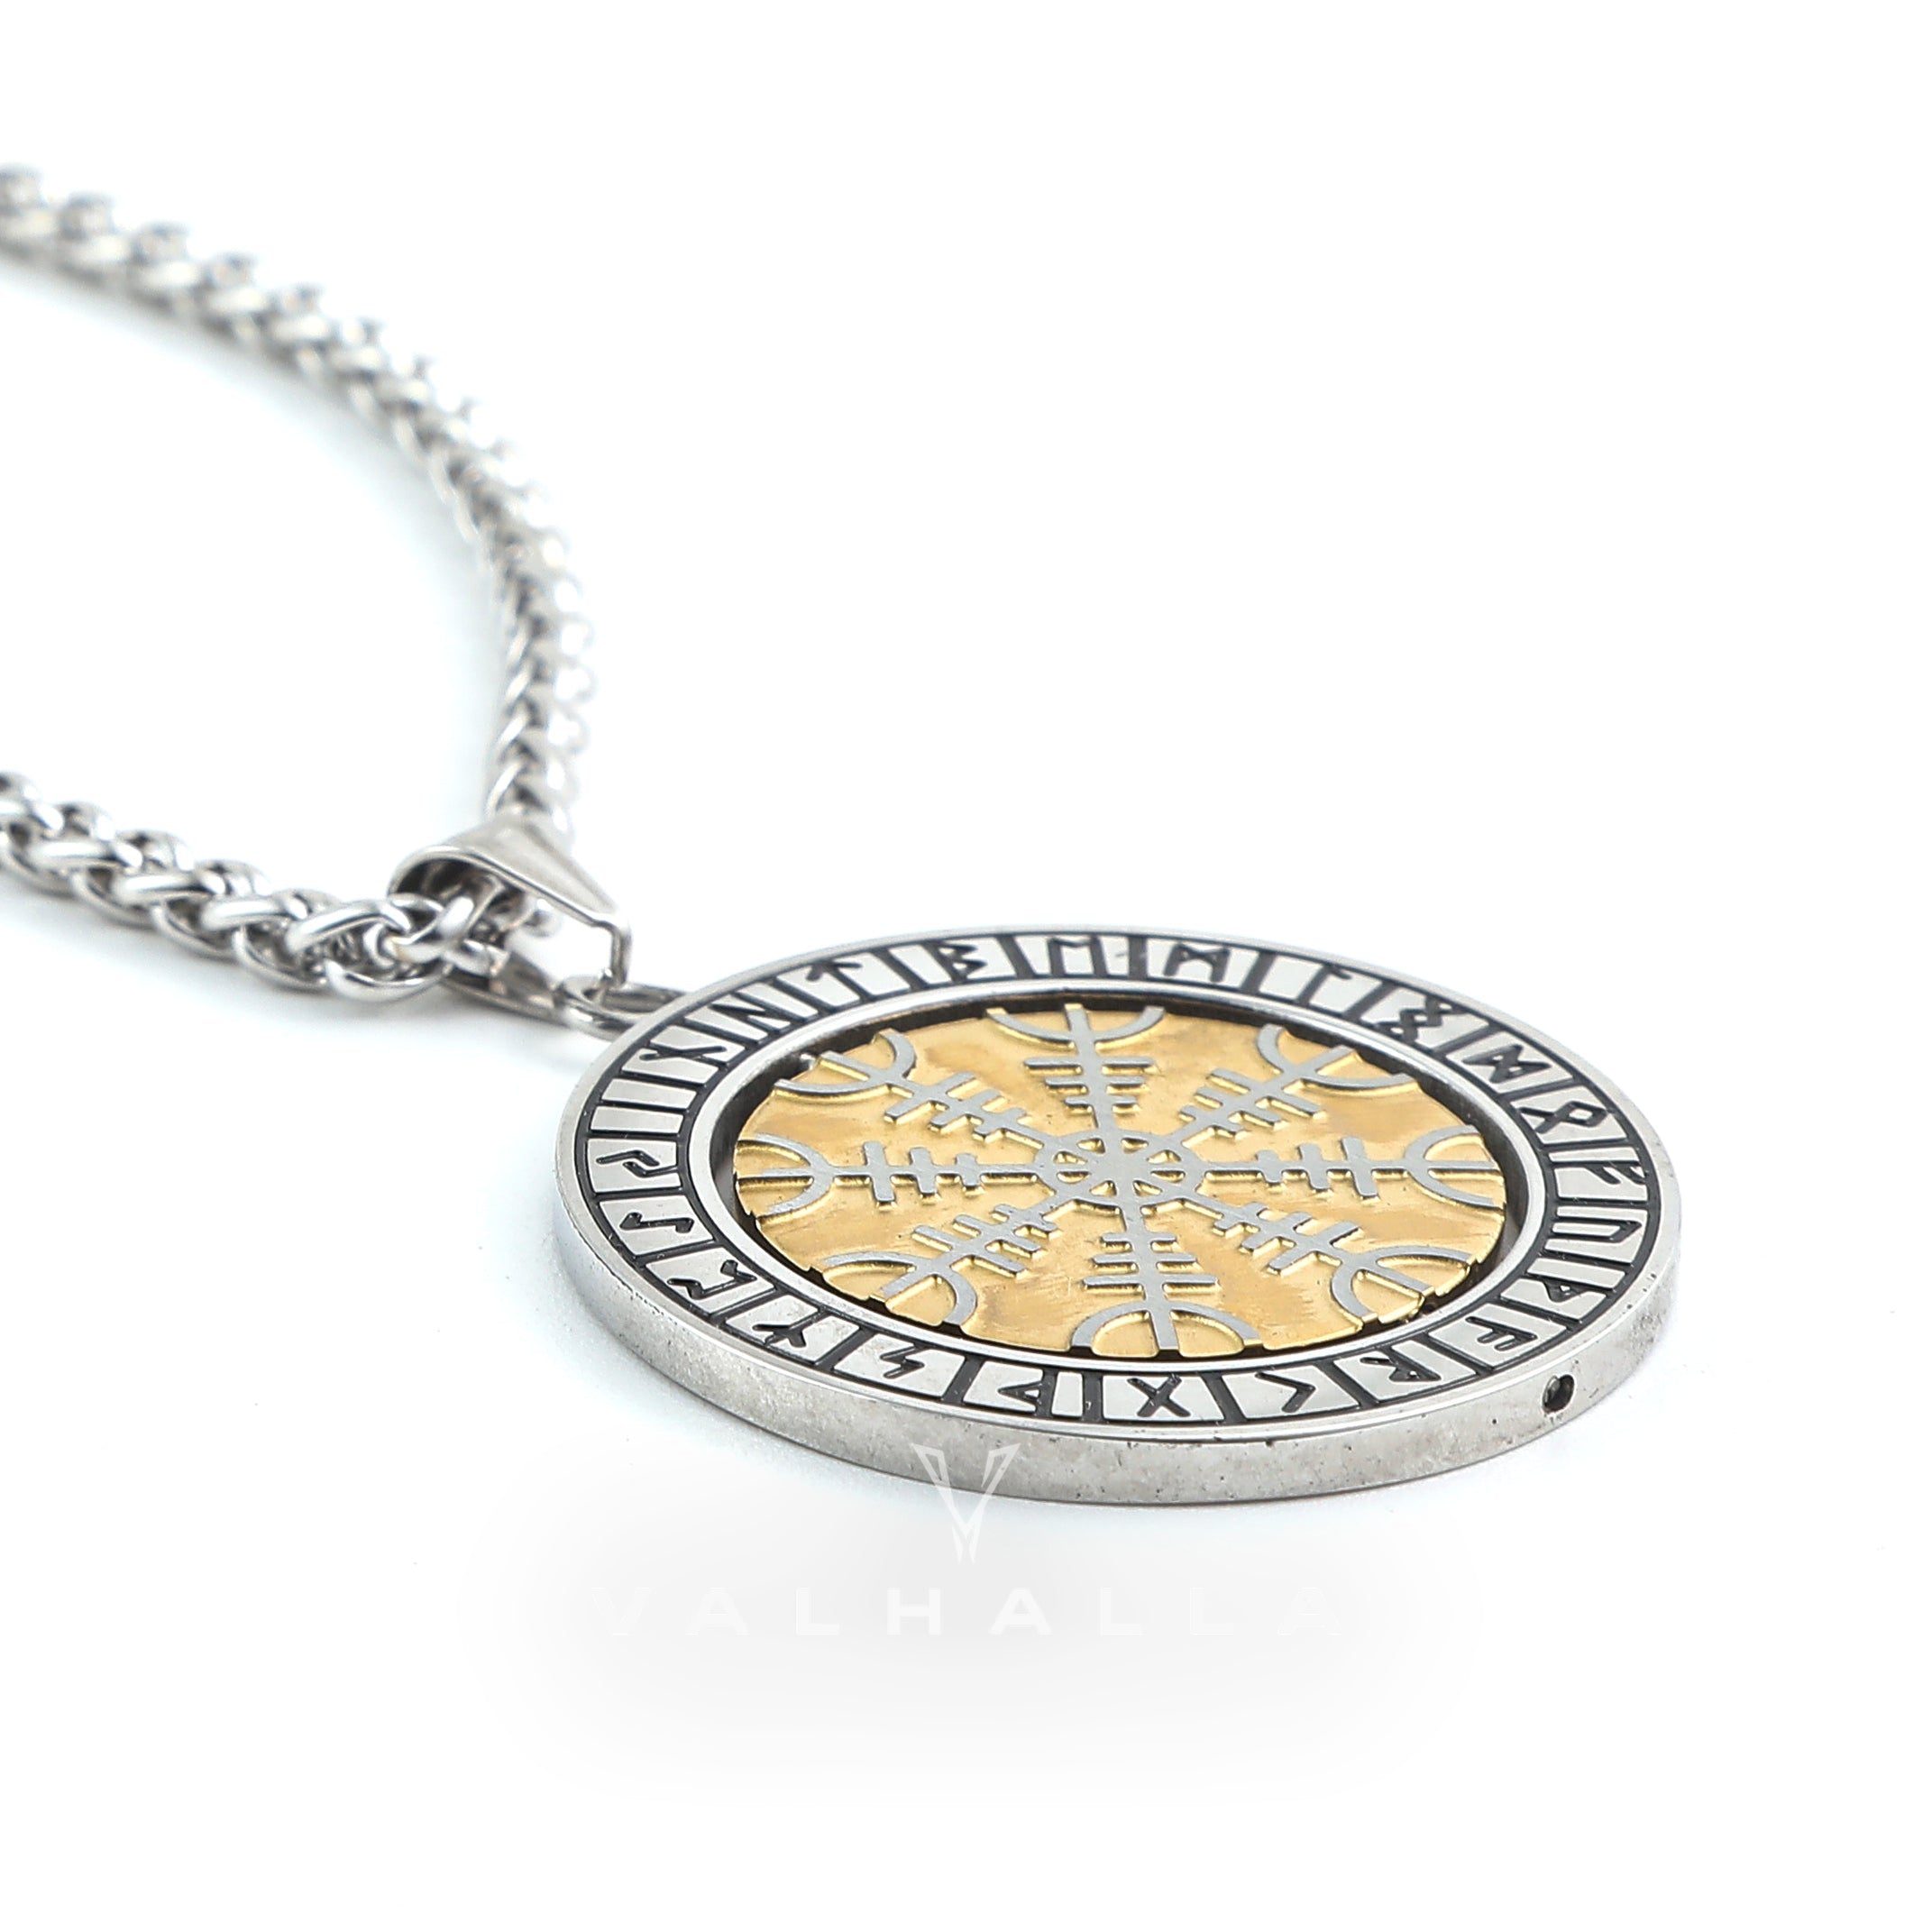 Dual Color Handcrafted Stainless Steel Reversible Helm of Awe/Vegvisir Pendant & Chain